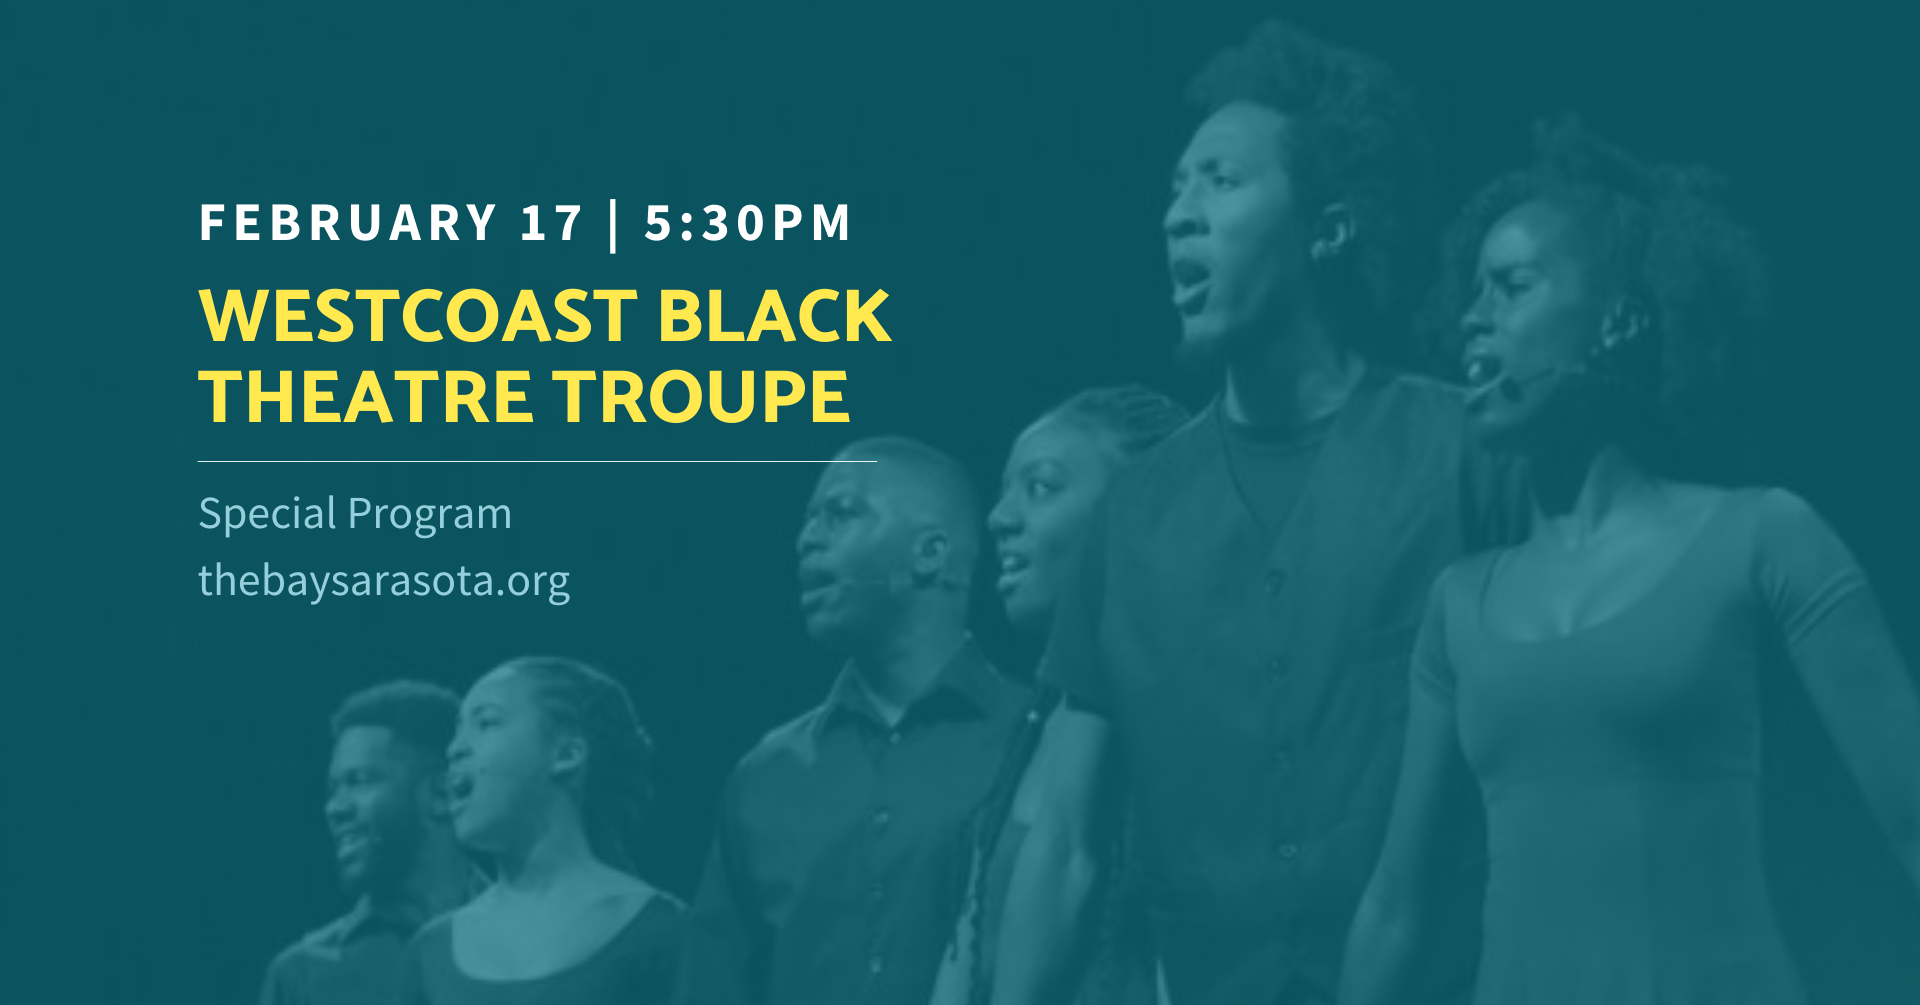 Program info for Westcoast Black Theatre Troupe's Jazzlinks performance on February 17th at The Bay